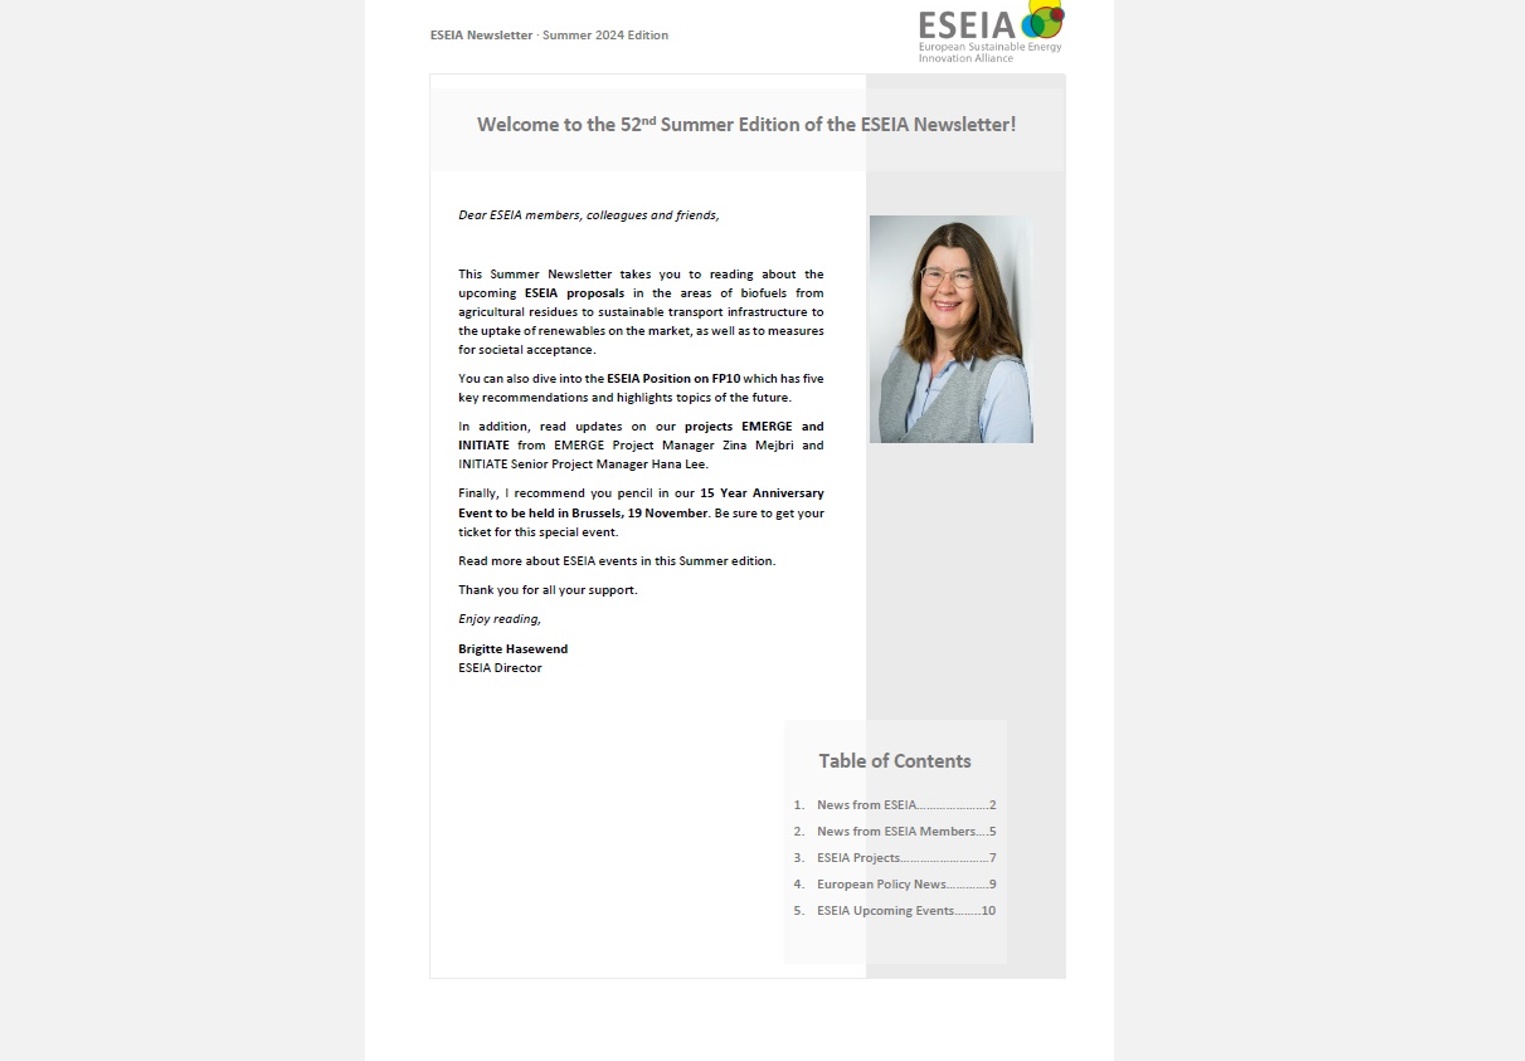 THE SUMMER 2024 EDITION OF THE ESEIA NEWSLETTER IS OUT NOW!